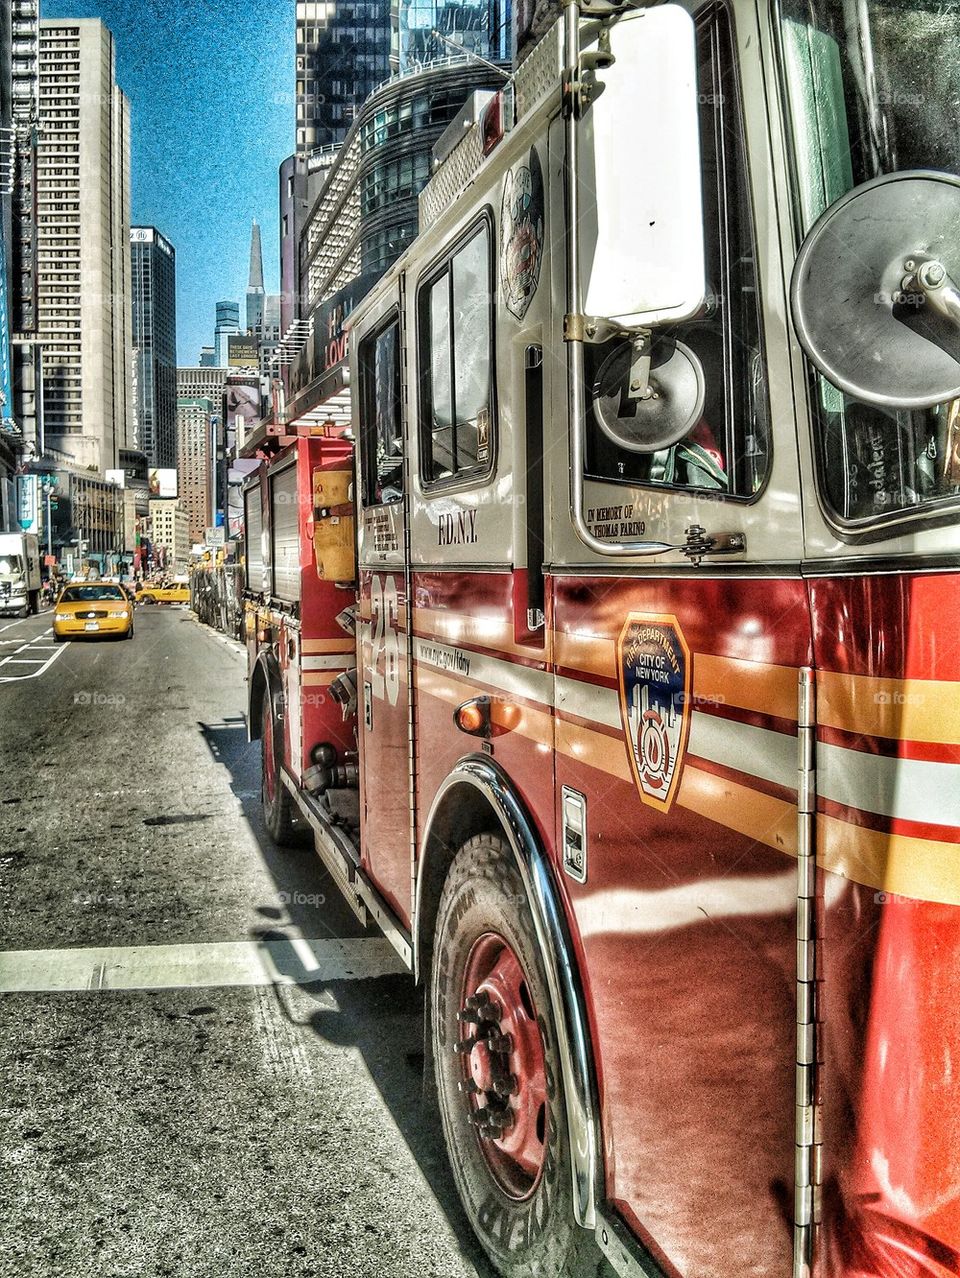 FDNY Fire Truck parked